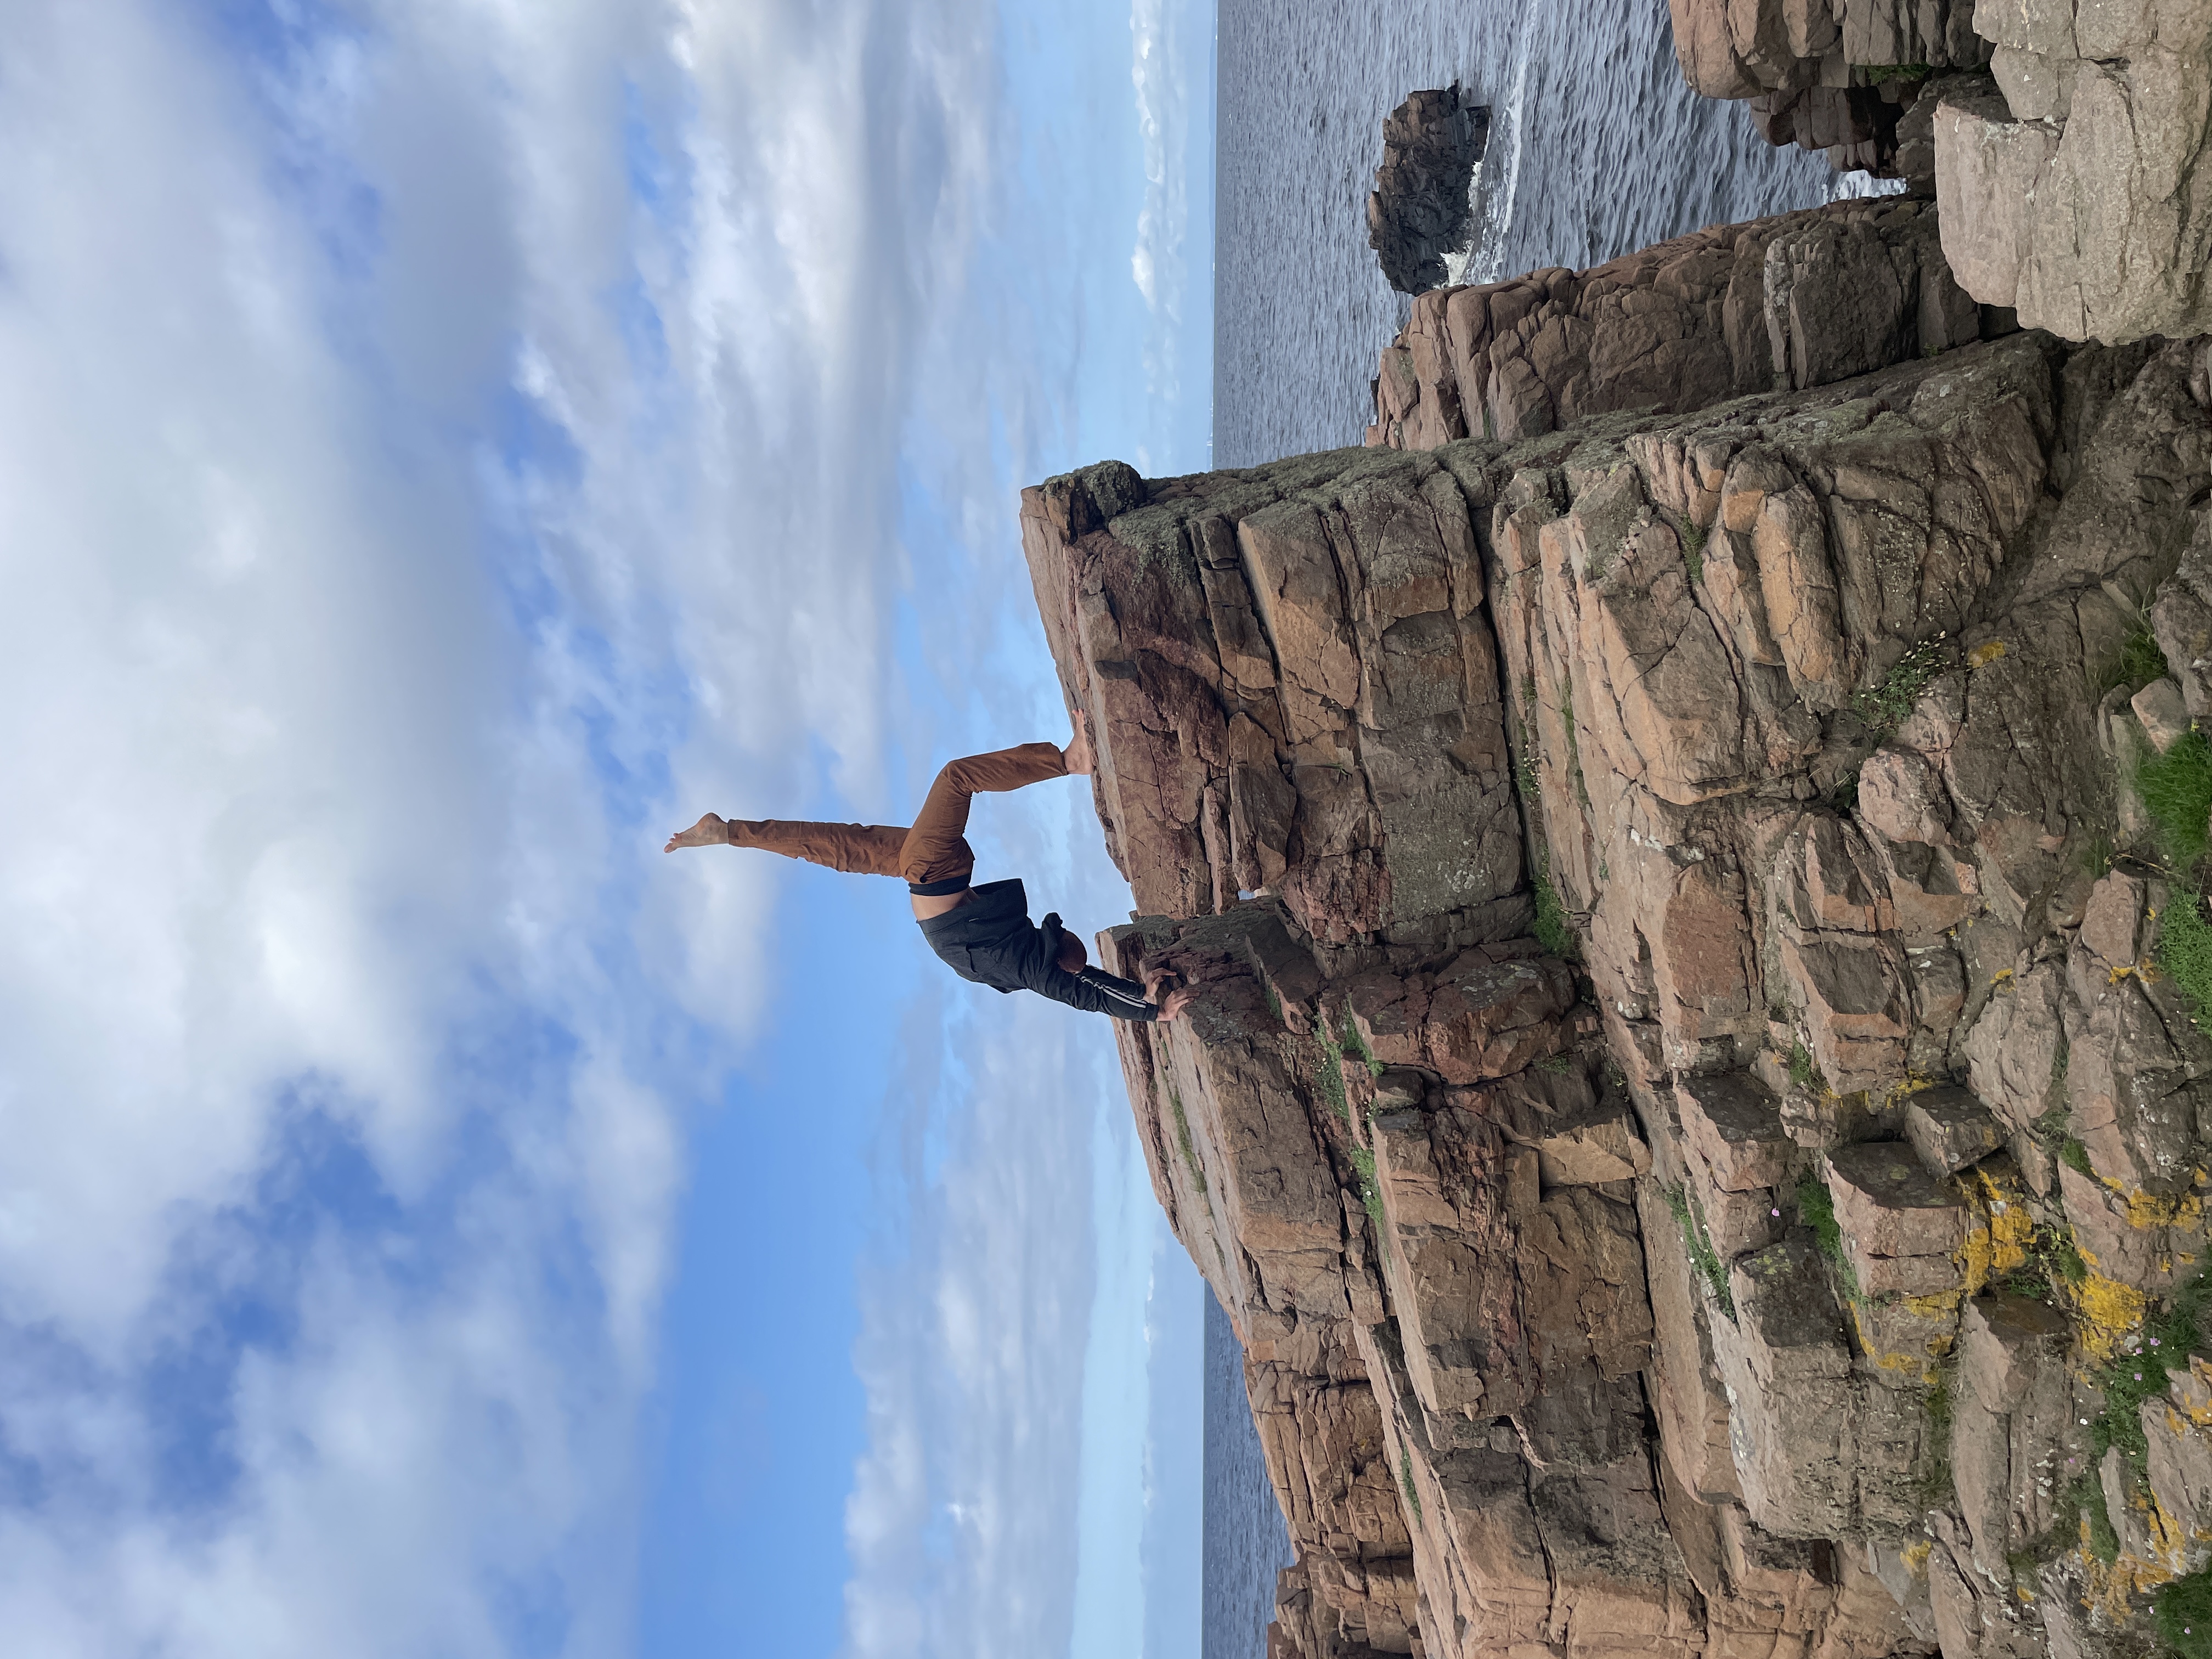 The yoga teacher does a backbend pose with one leg pointed to the sky, atop a high rocky outcropping by the ocean.